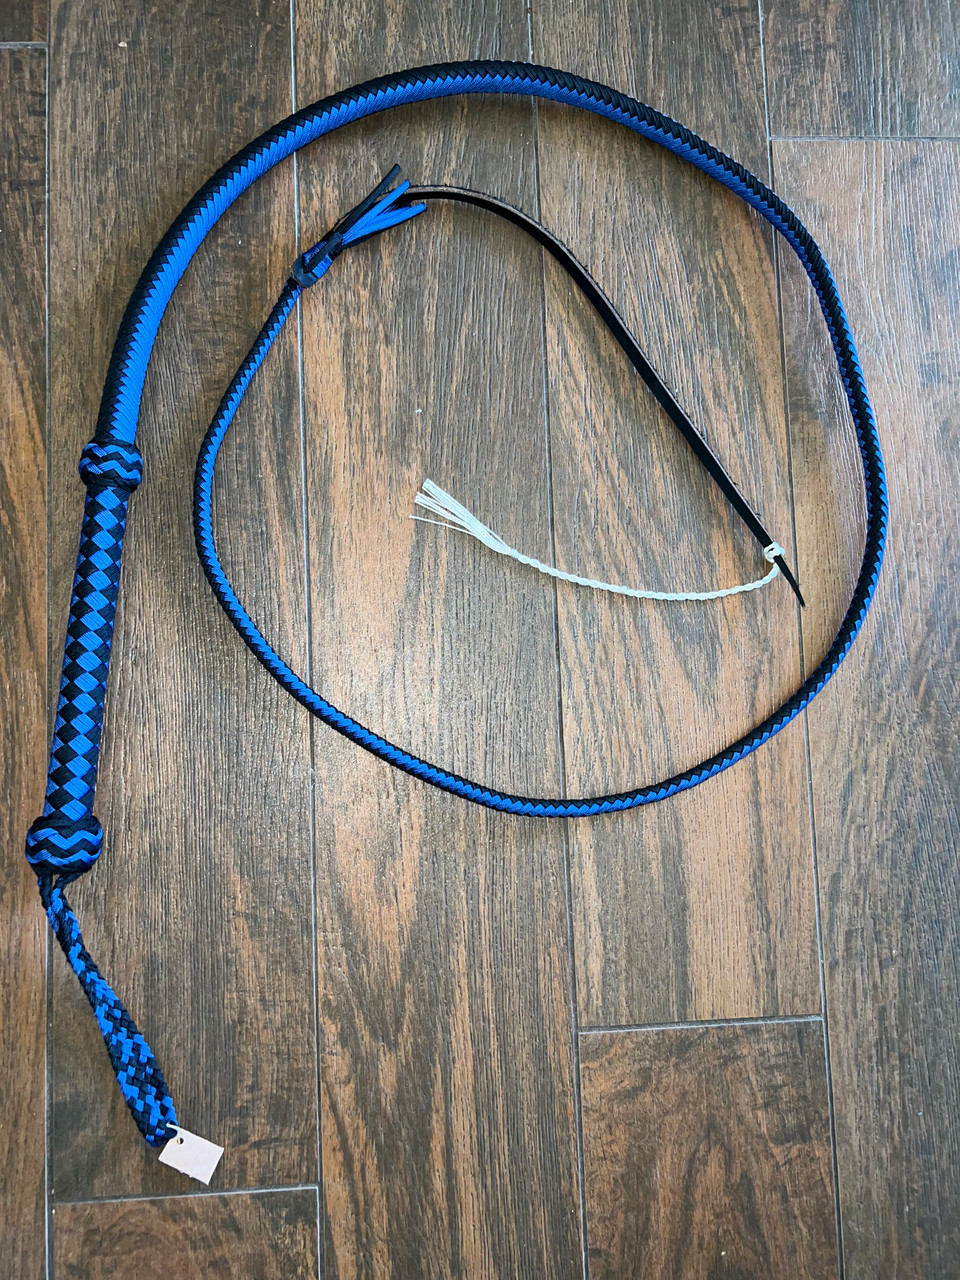 Bull Whip Leather 12 Ply